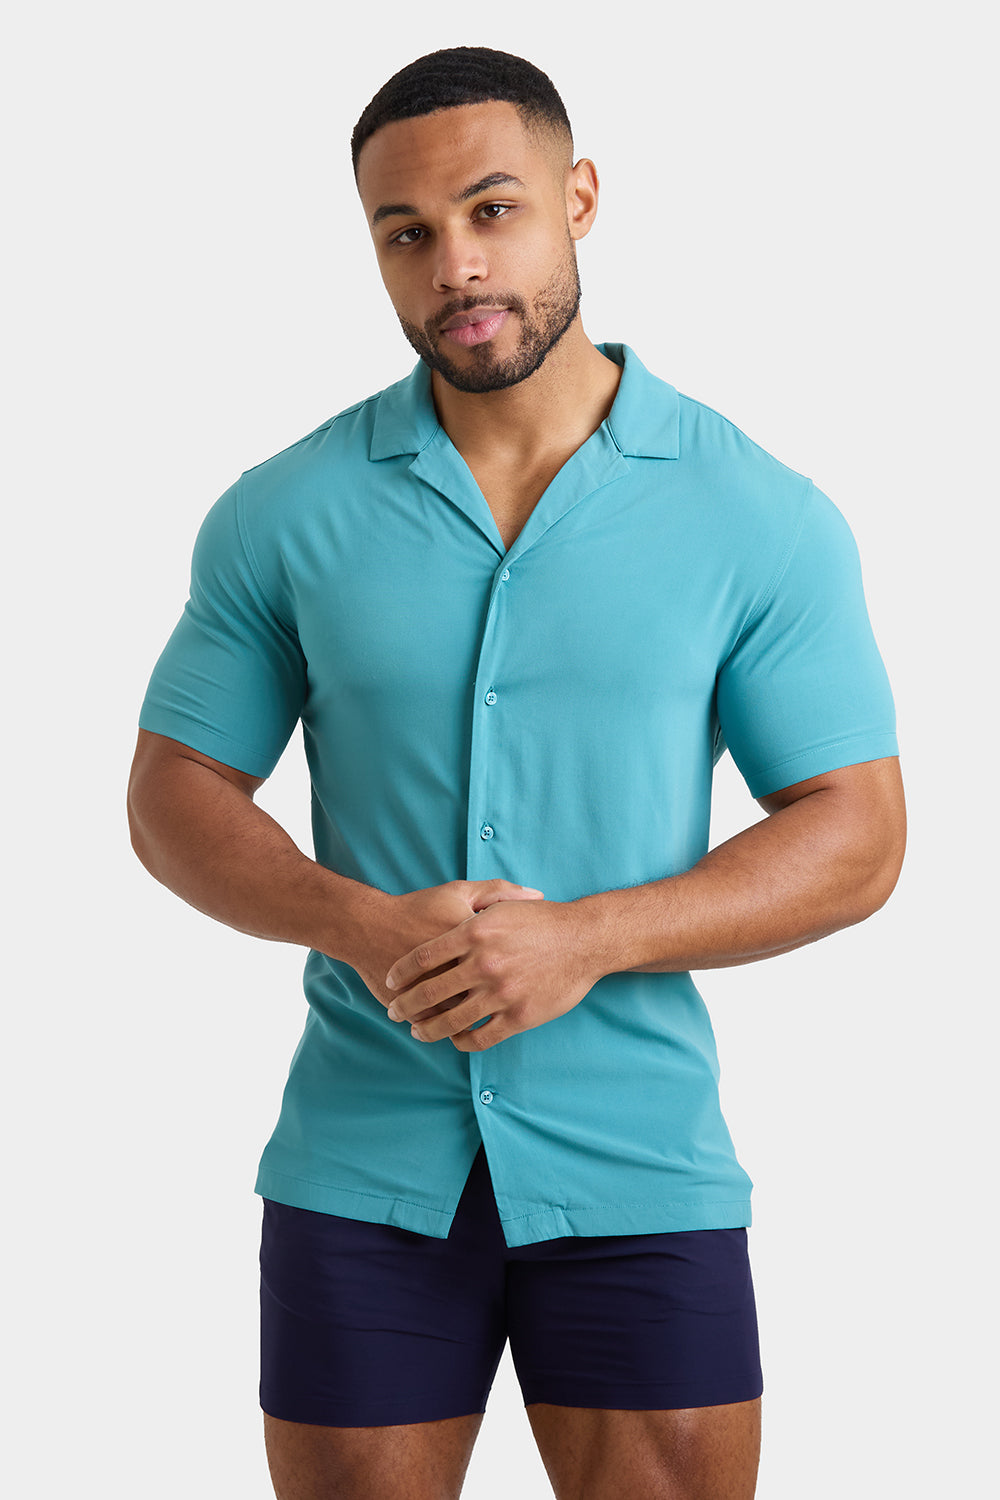 Athletic Fit Short Sleeve Viscose Shirt in Teal